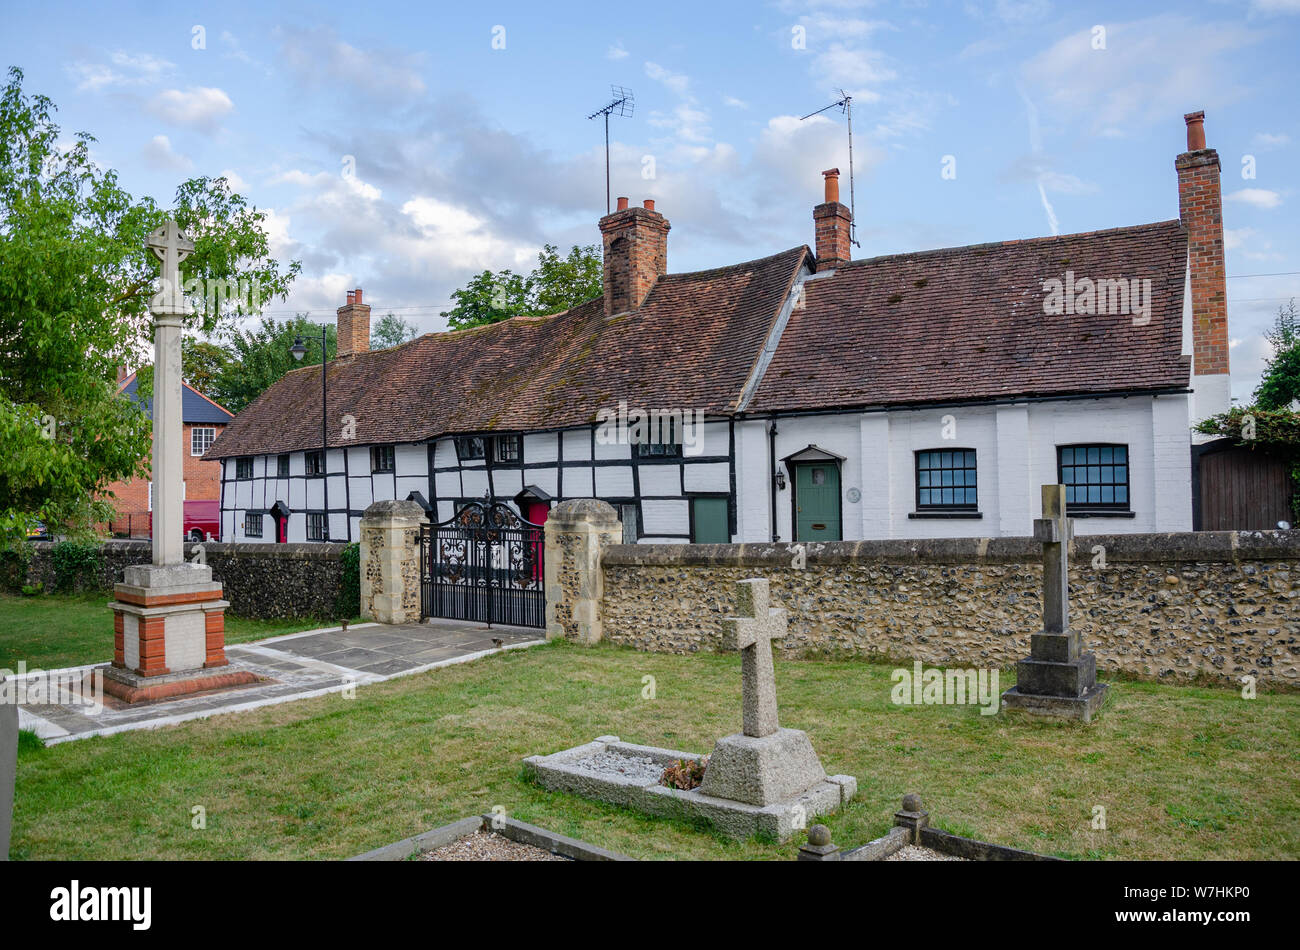 Half timbered black and white cottages in the village of Pangbourne in West Berkshire, UK beyond the churchyard of St James the Less Church. Stock Photo